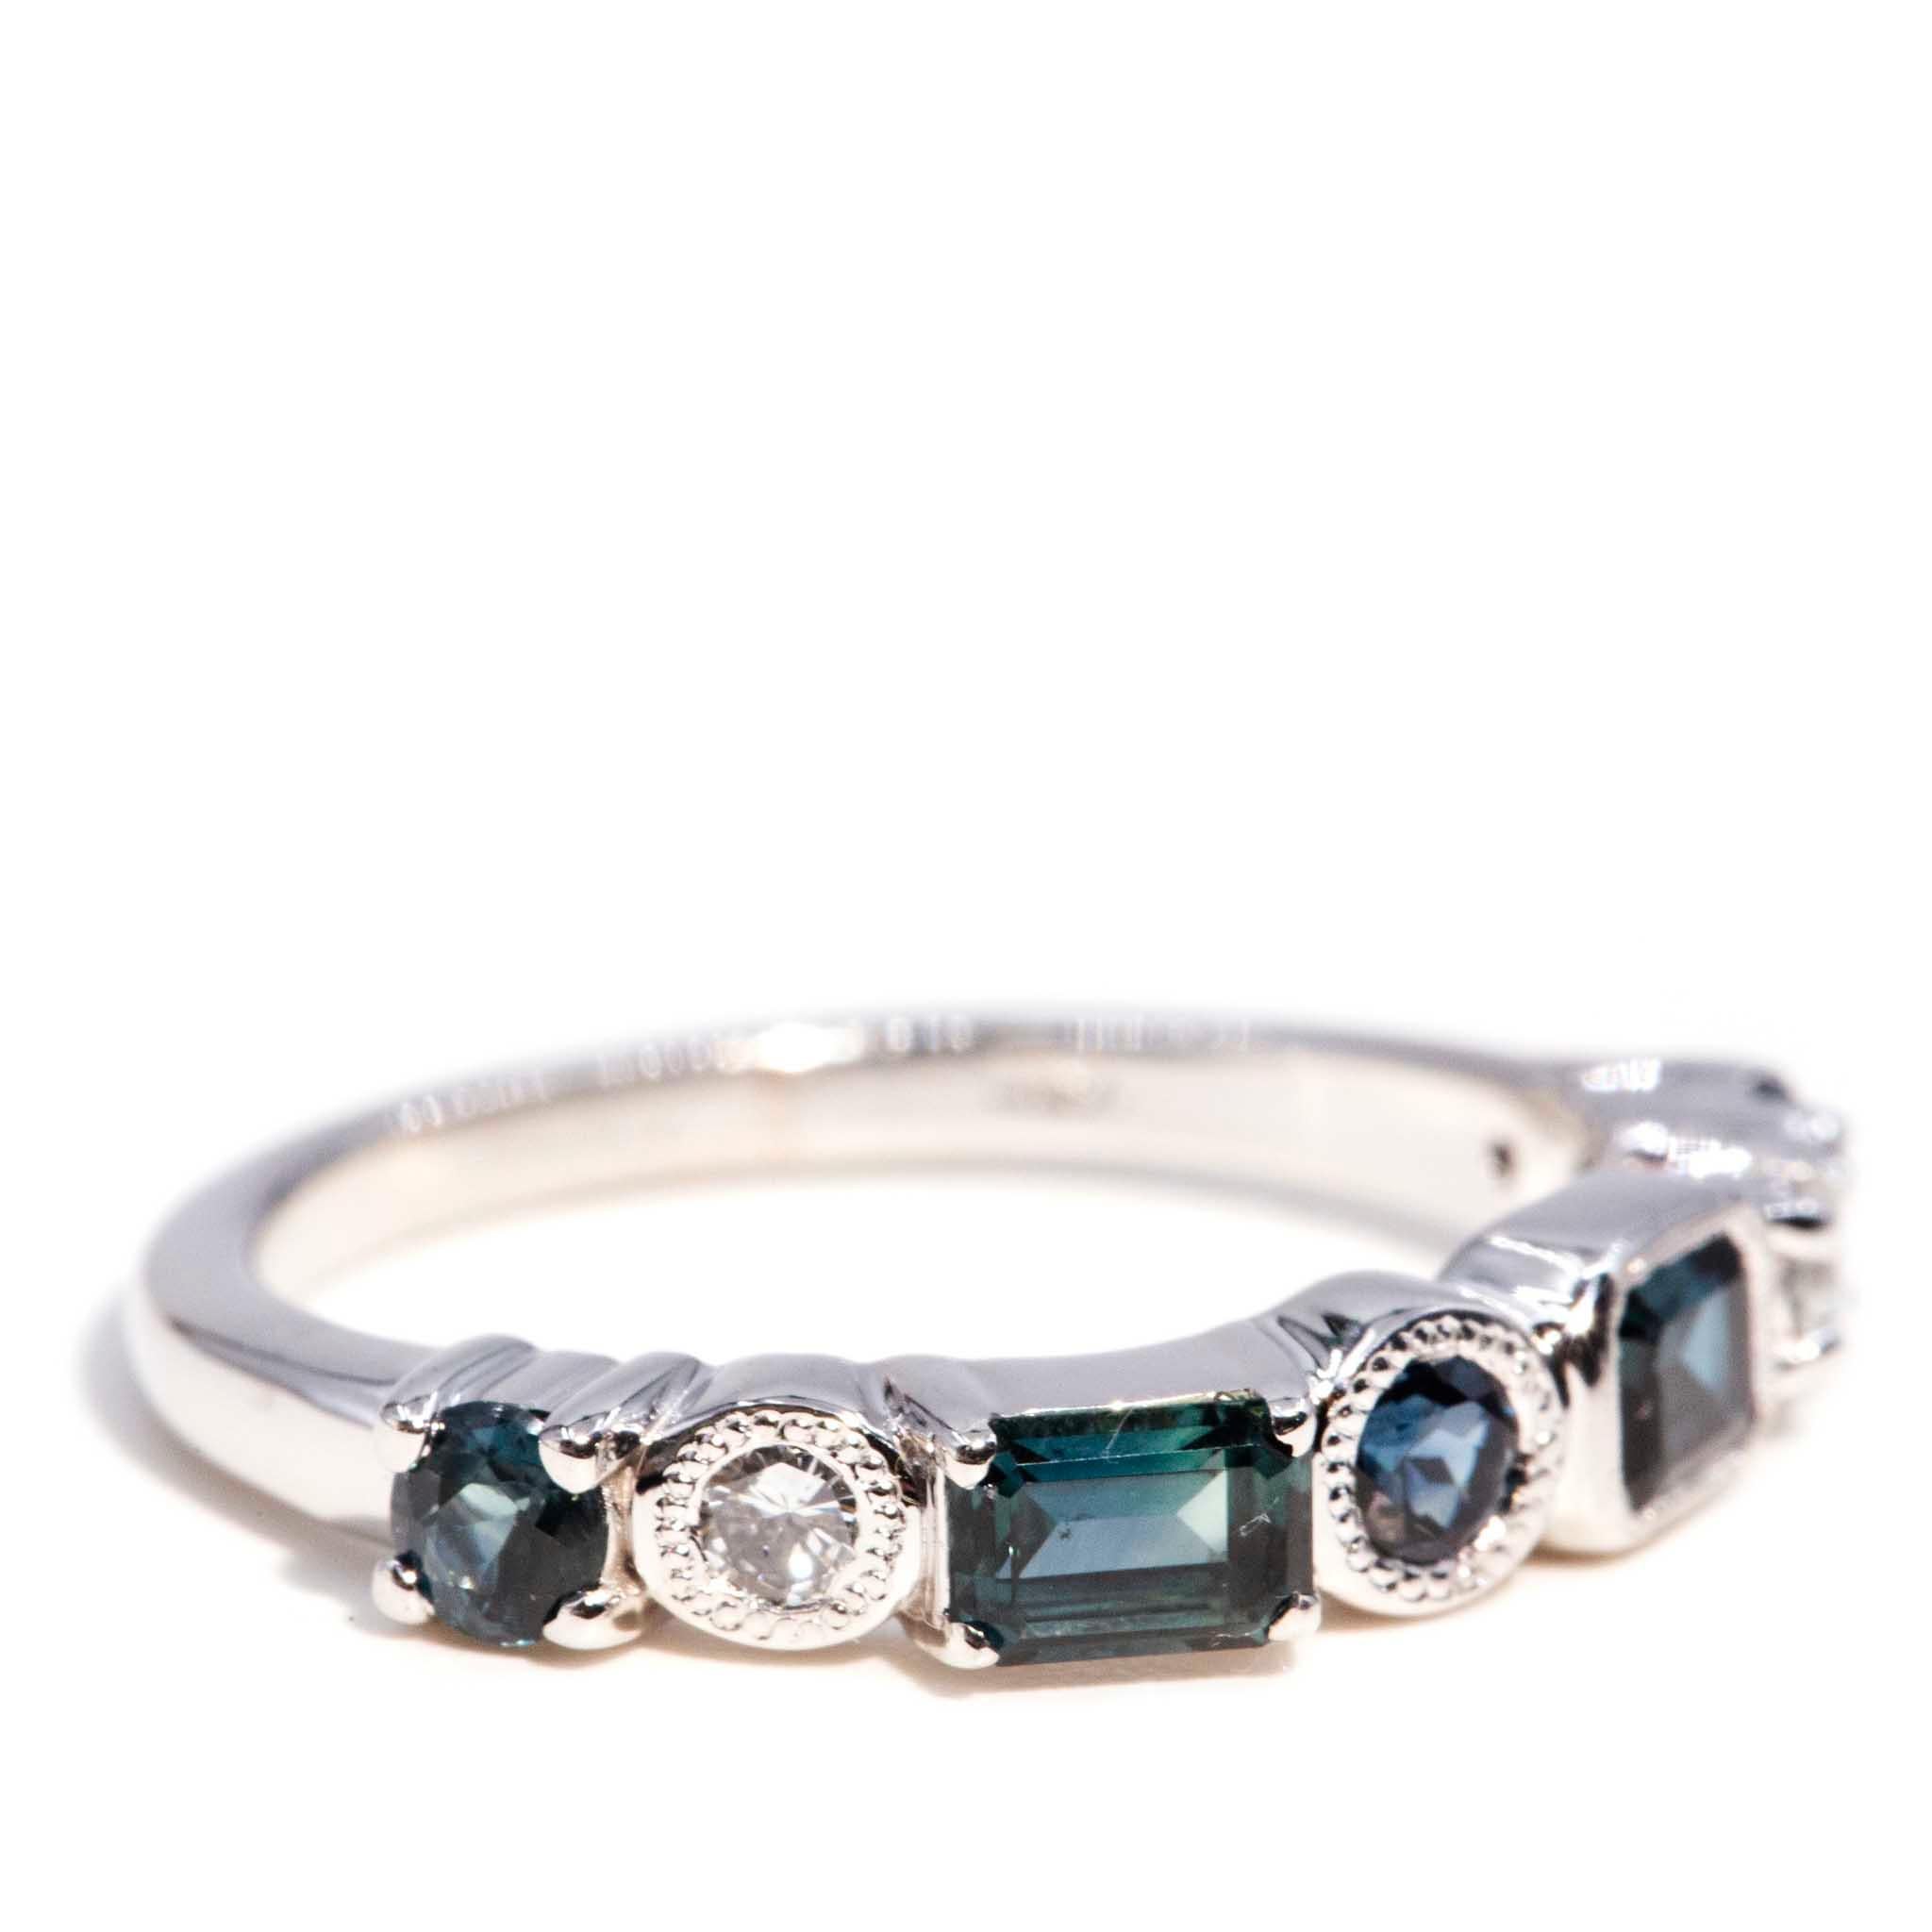 Emerald Cut Contemporary 1.11 Carat Teal & Blue Sapphire & Diamond 18 Carat White Gold Ring For Sale